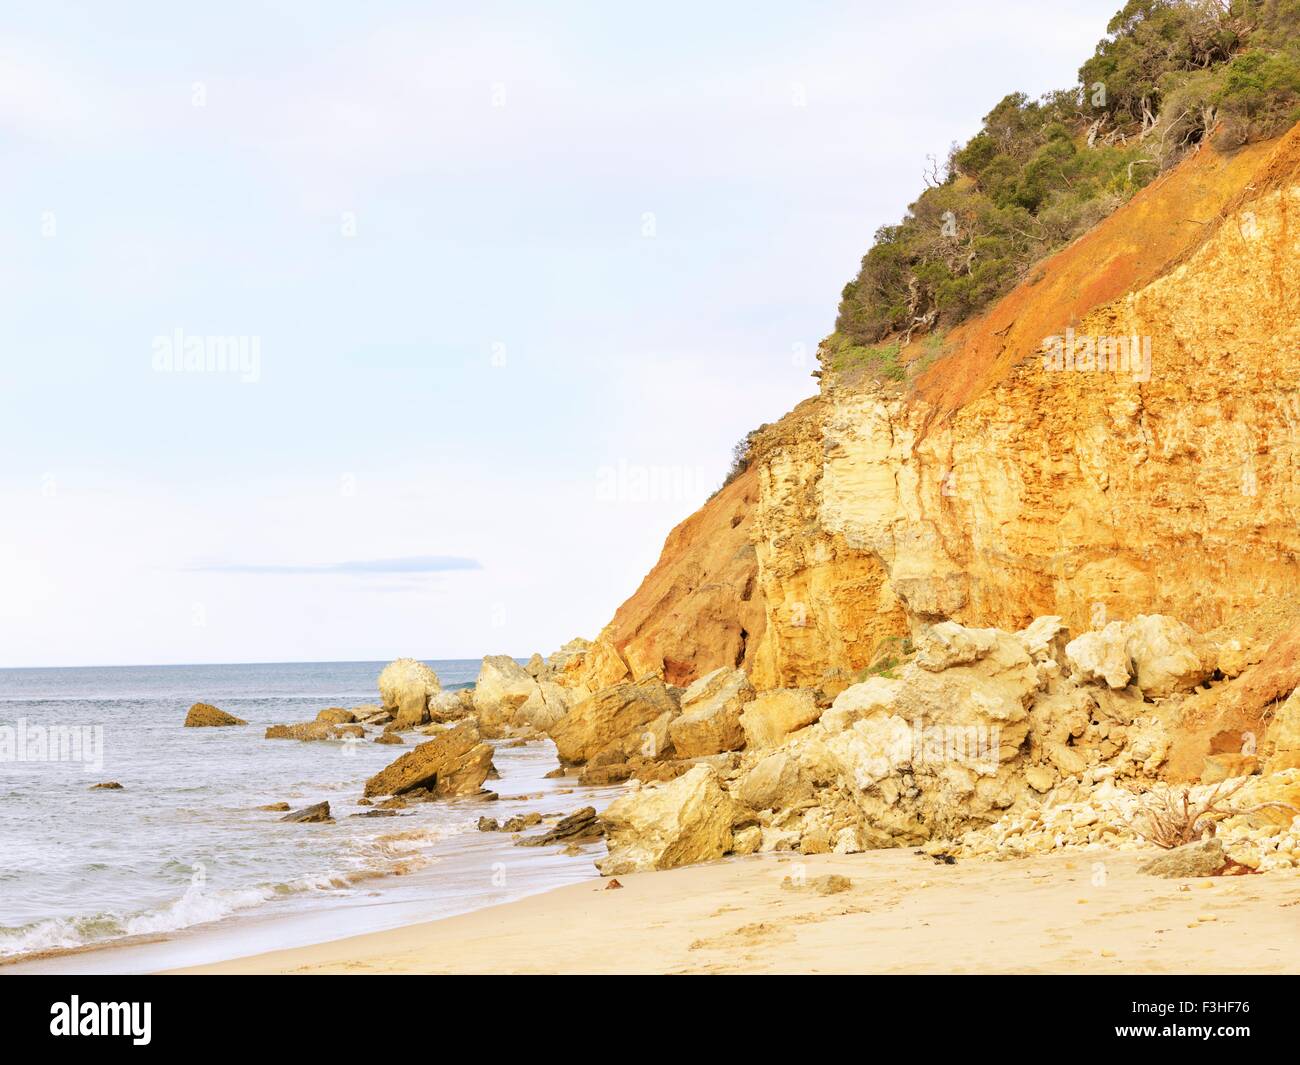 Eroded cliff and rocks, Point Addis National Park, Anglesea, Australia Stock Photo